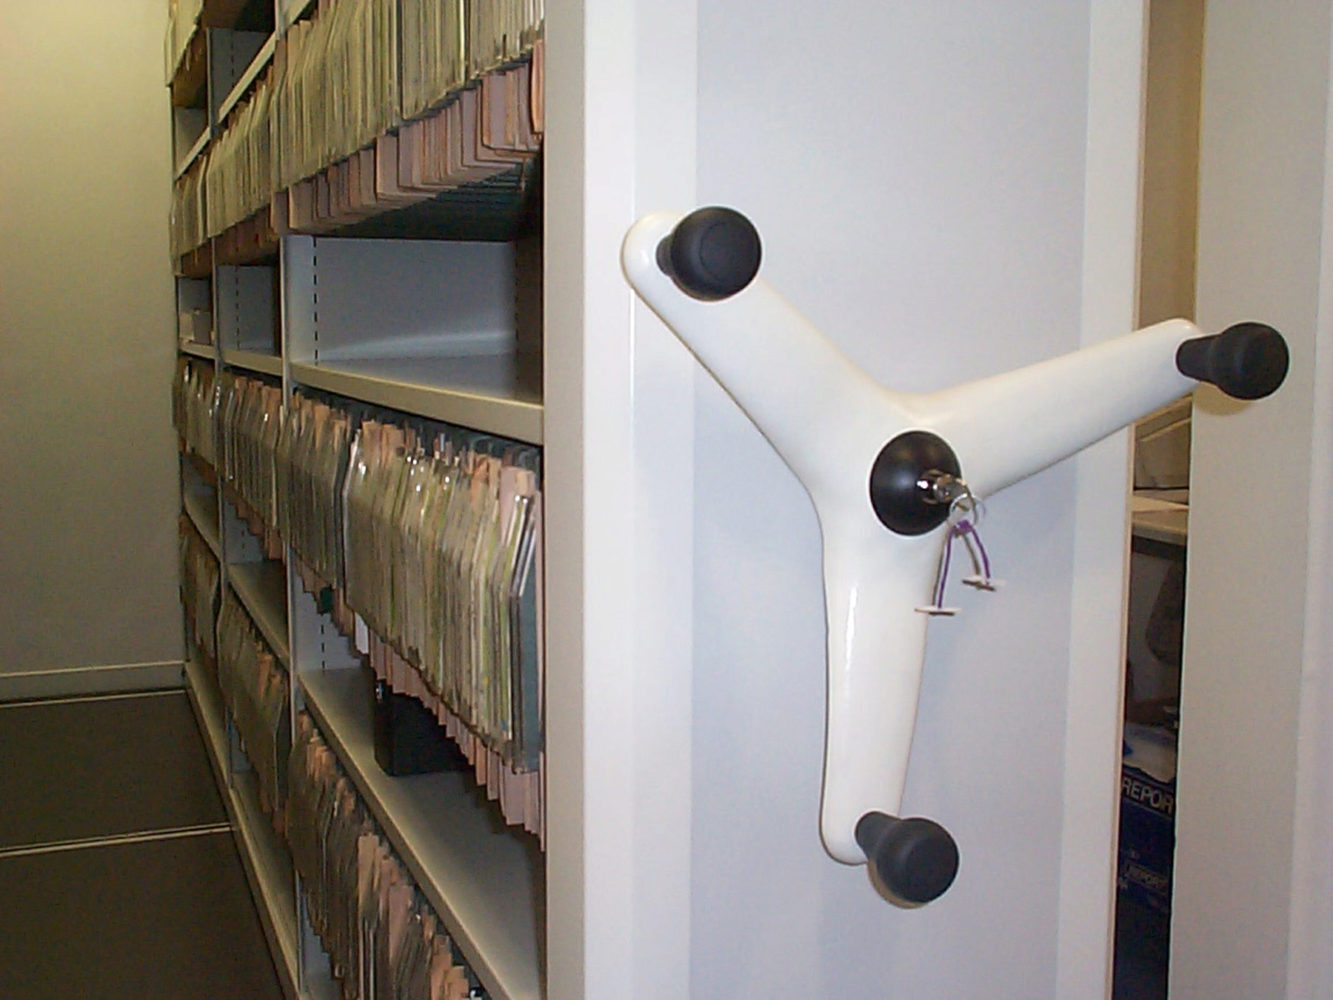 Medical Records Storage Systems And Shelves For Files And Documents